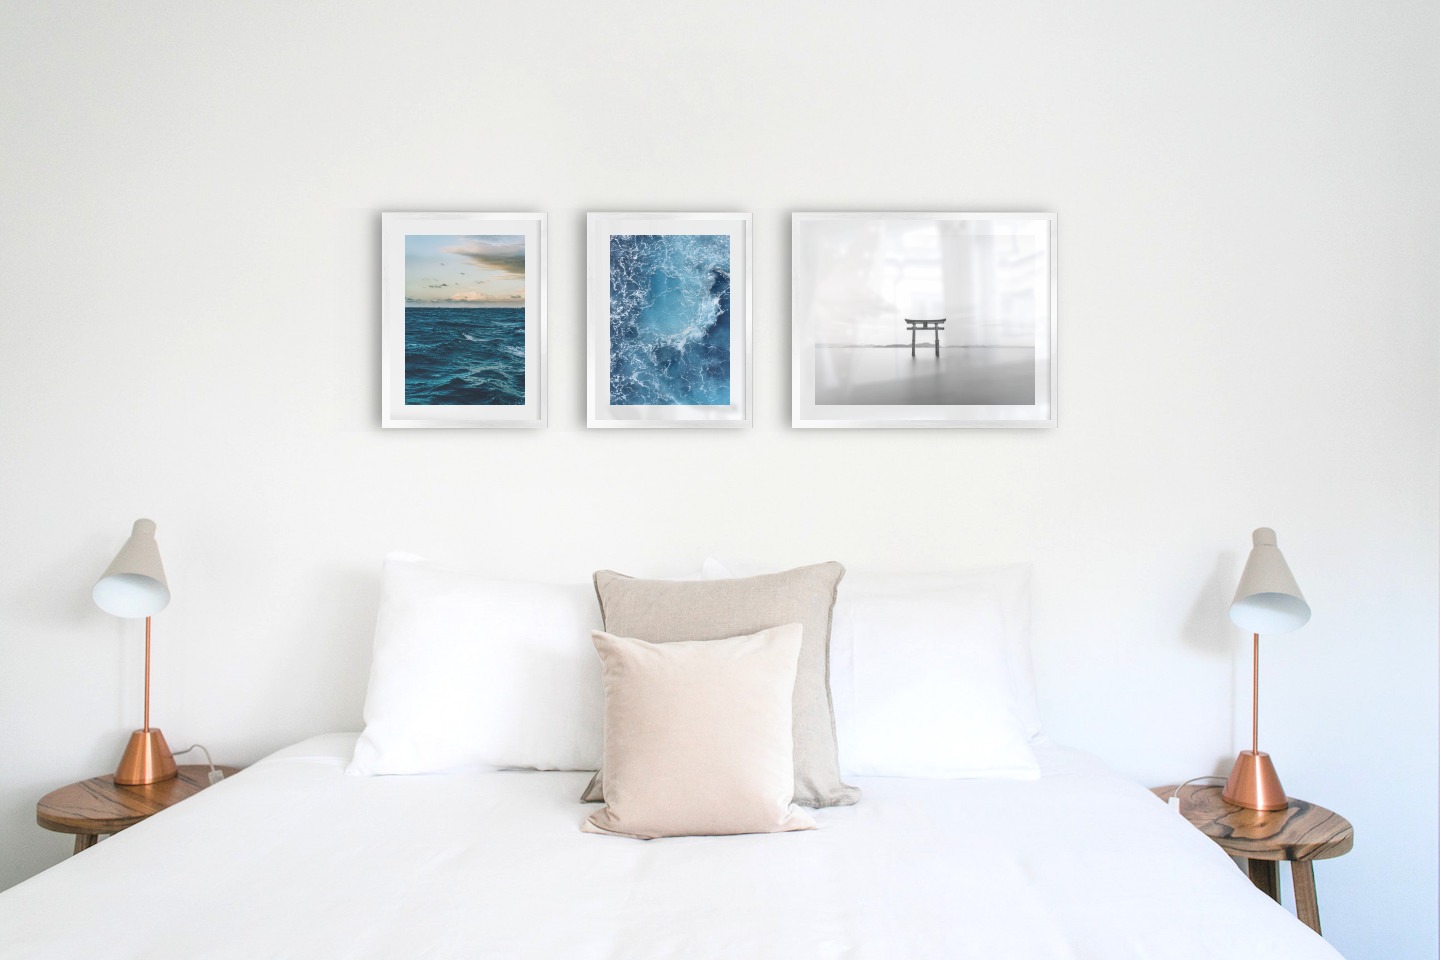 Gallery wall with picture frames in silver in sizes 30x40 and 40x50 with prints "Somewhat out at sea", "Sea from above" and "Pillars in the water"